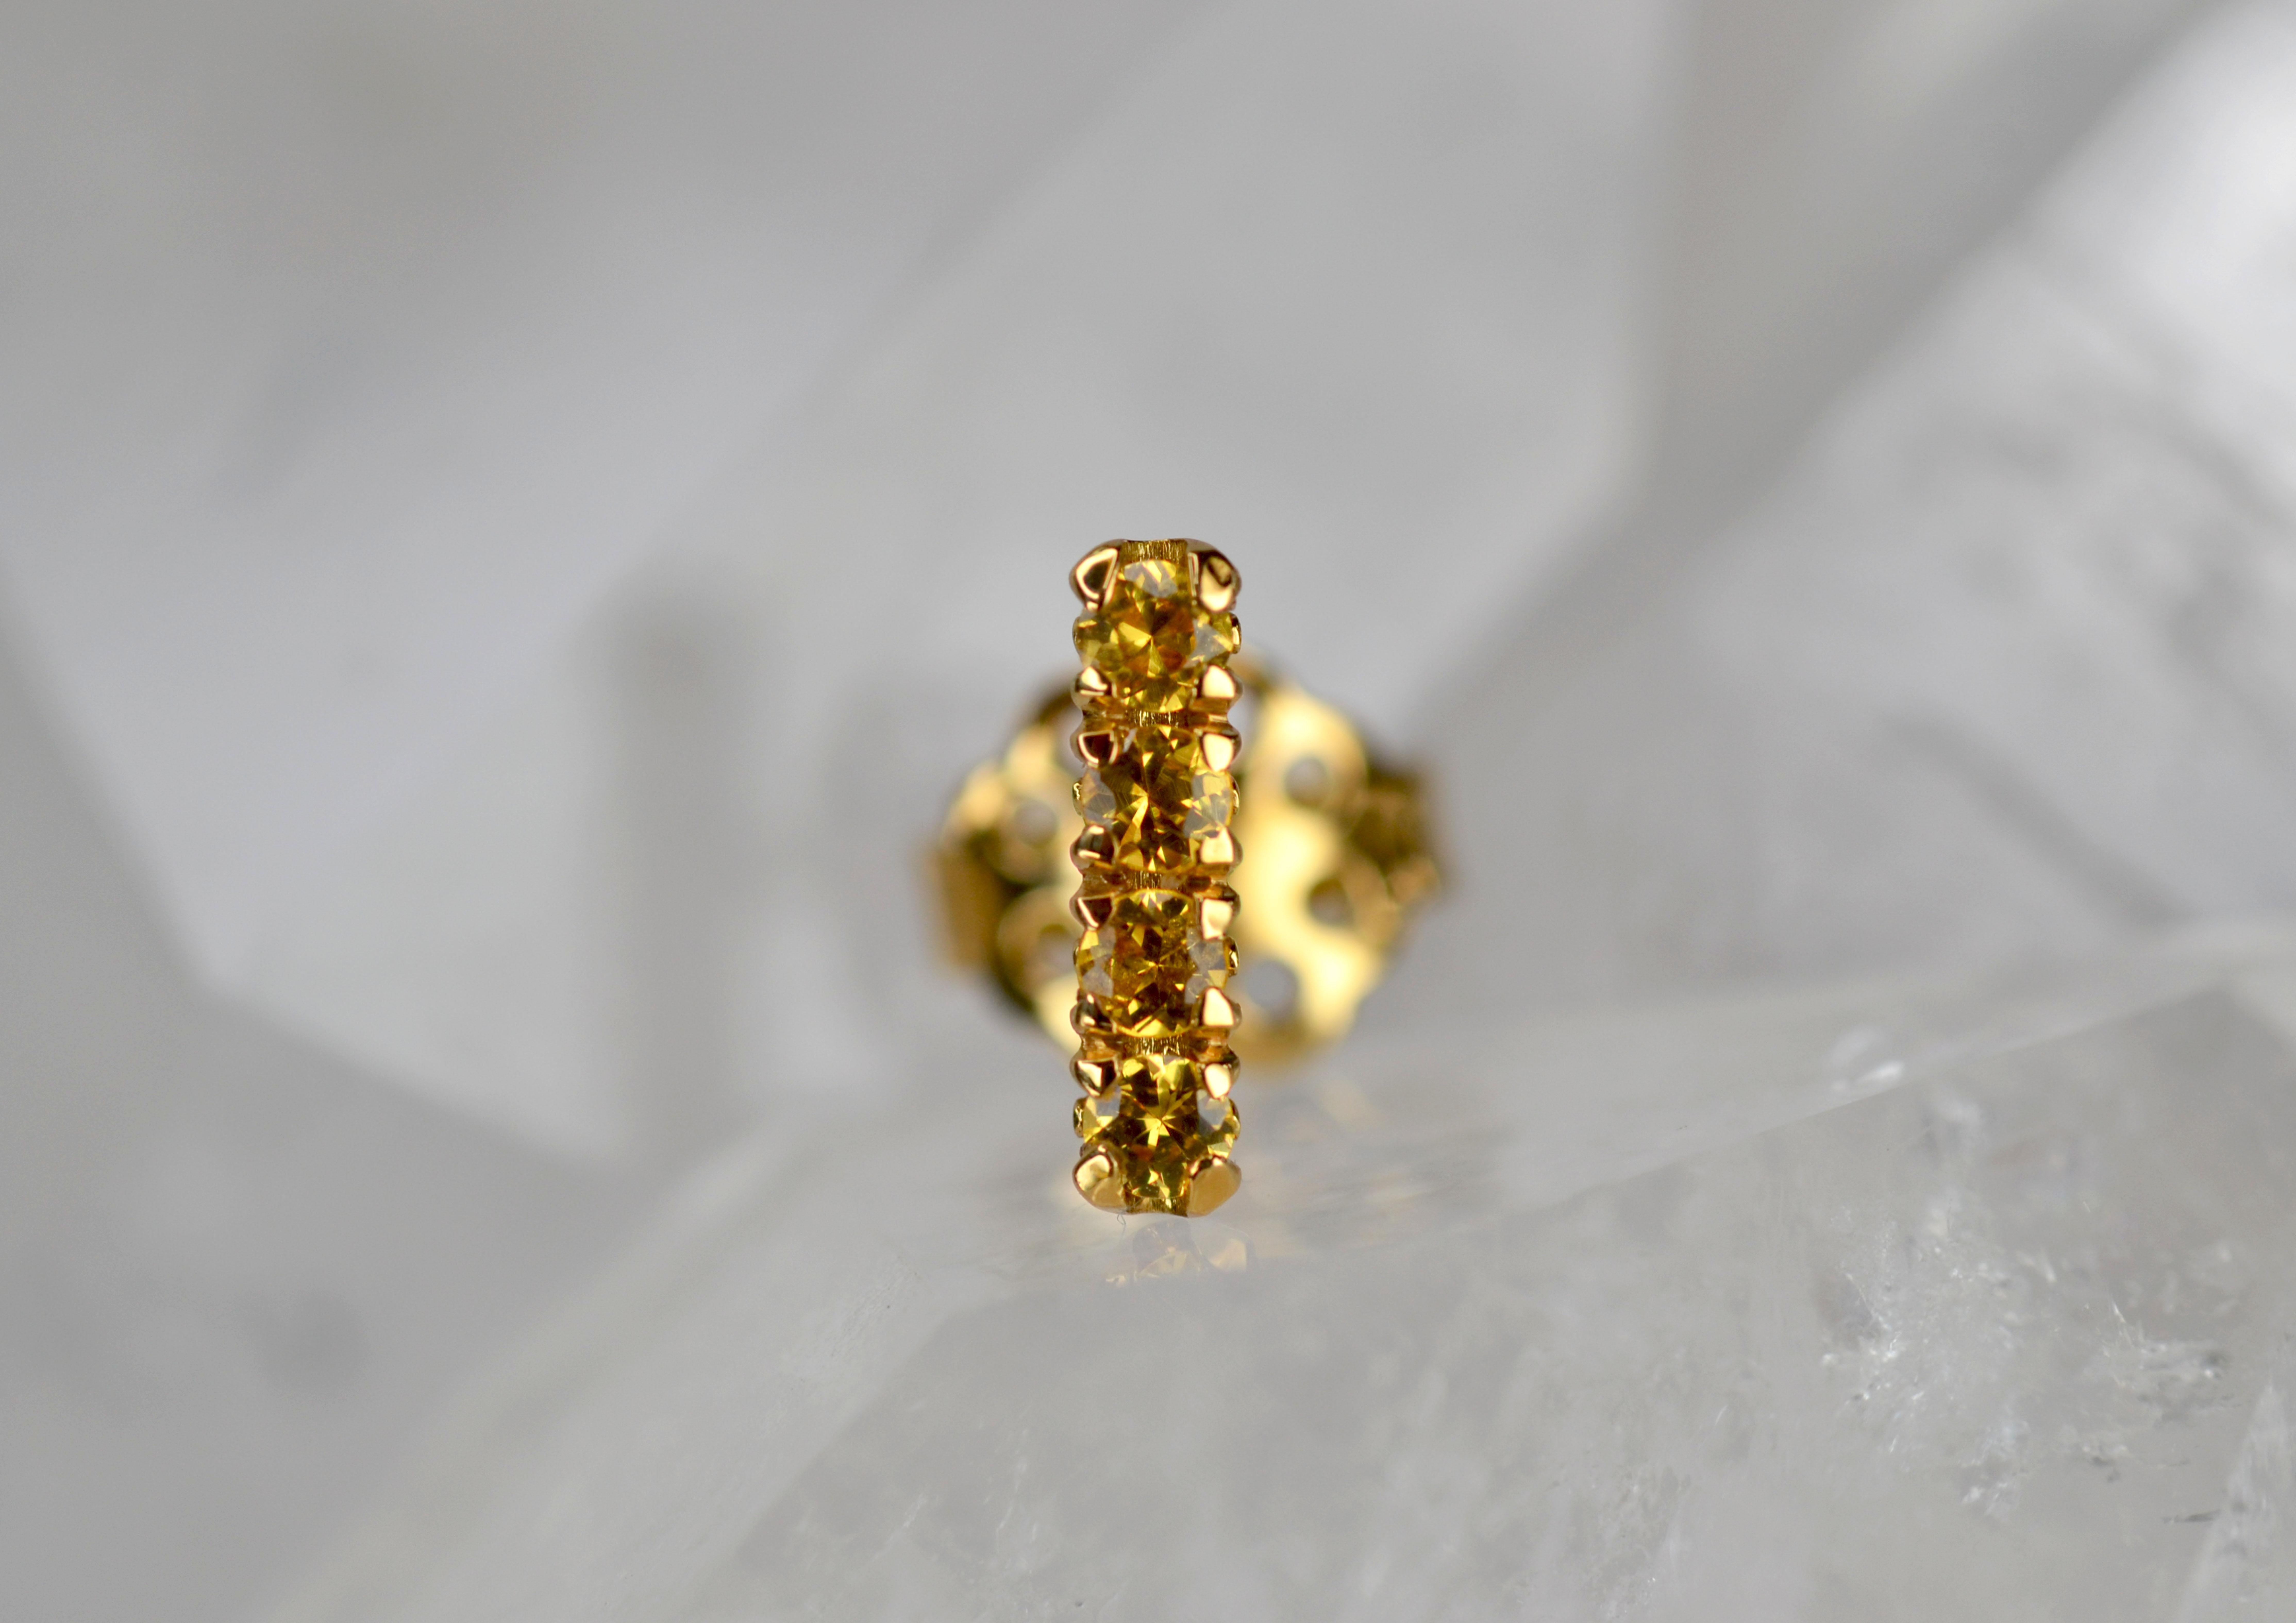 This single earring stud is part of our Blossom Collection of mix and match pieces. The glistening yellow sapphires are set on an 18k gold blossom flower collet to be worn alongside your favourite pair of earrings, our blossom hoops, or combine with